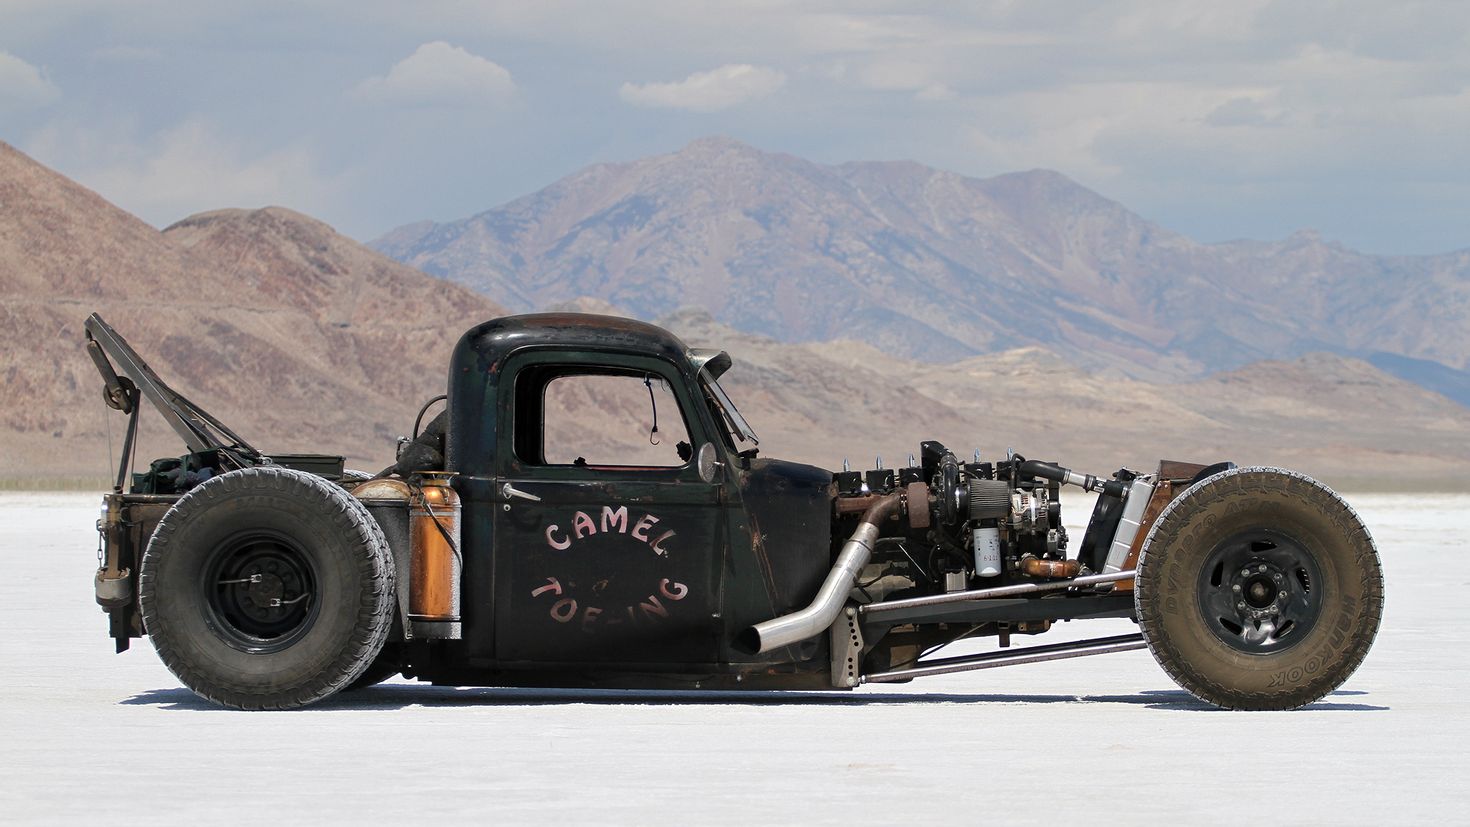 Хардкор машин. 35 Ford rat Rod. ЗИЛ 157 Рэт род. Хот род Рэт род. Ford rat Rod 2020.